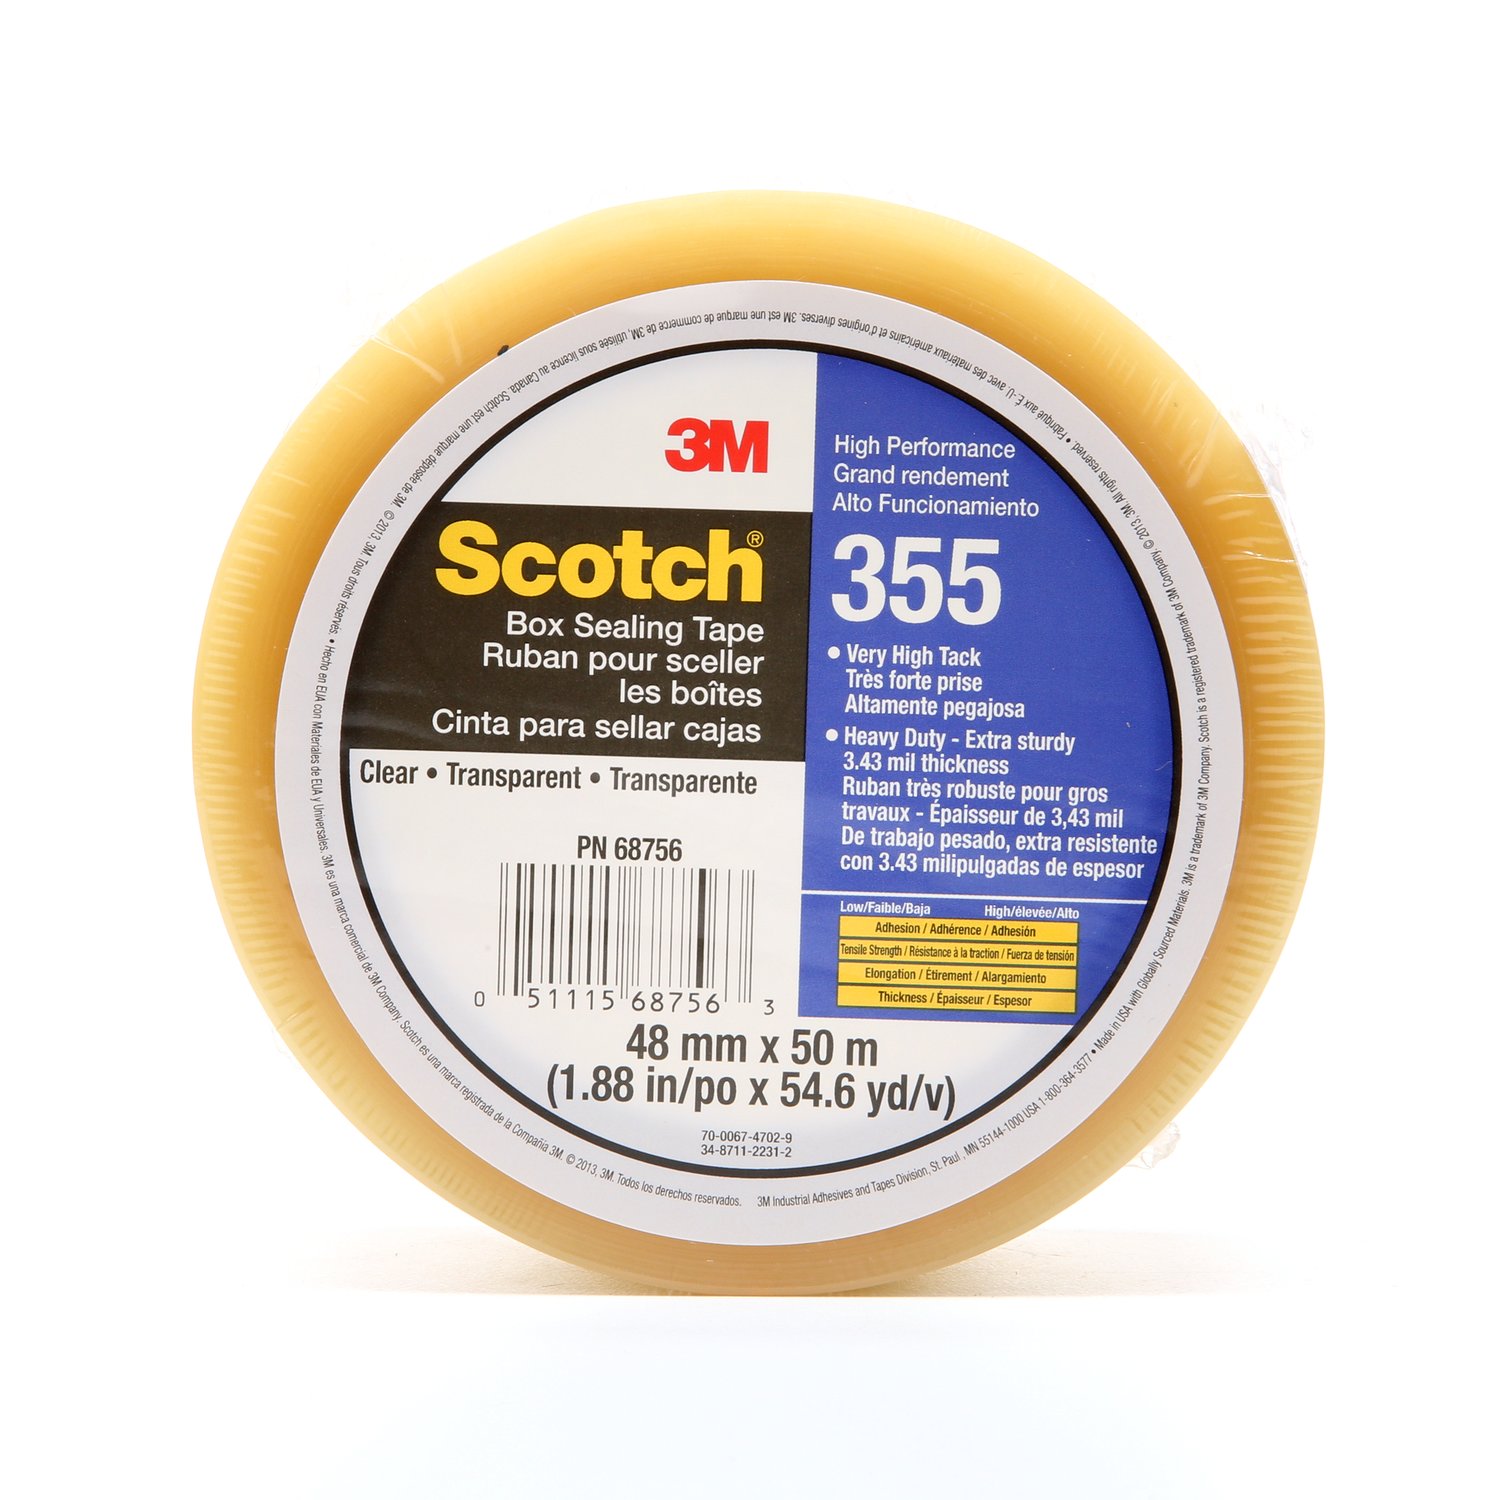 7010302430 - Scotch Box Sealing Tape 355, Clear, 48 mm x 50 m, 36/Case, Individually
Wrapped Conveniently Packaged